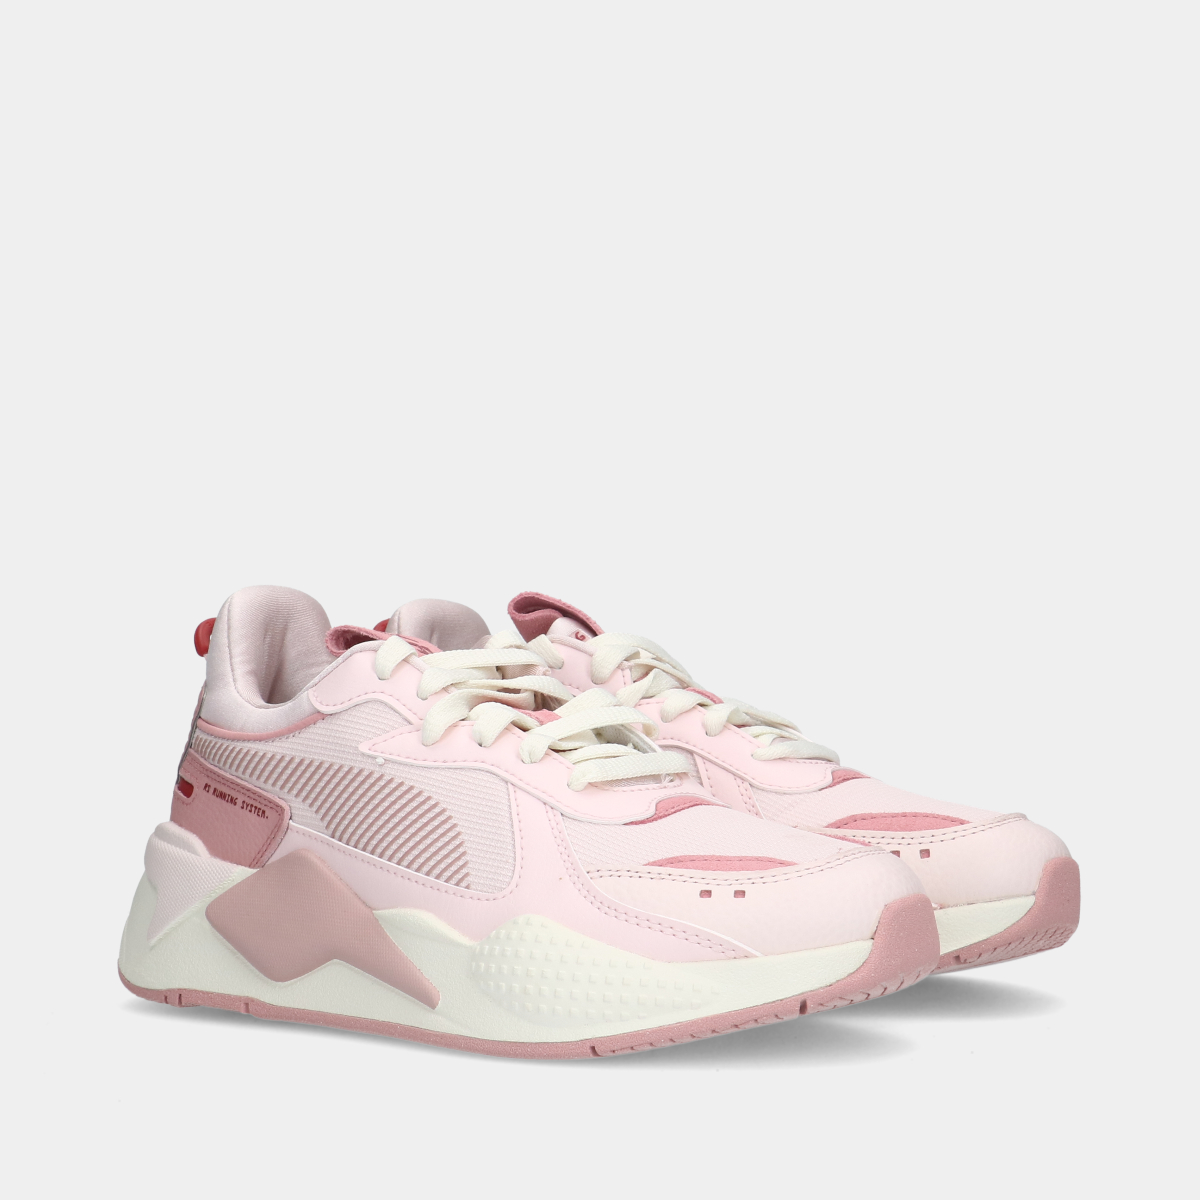 Puma RS-X Soft Wns Pink-Warm/ White dames sneakers